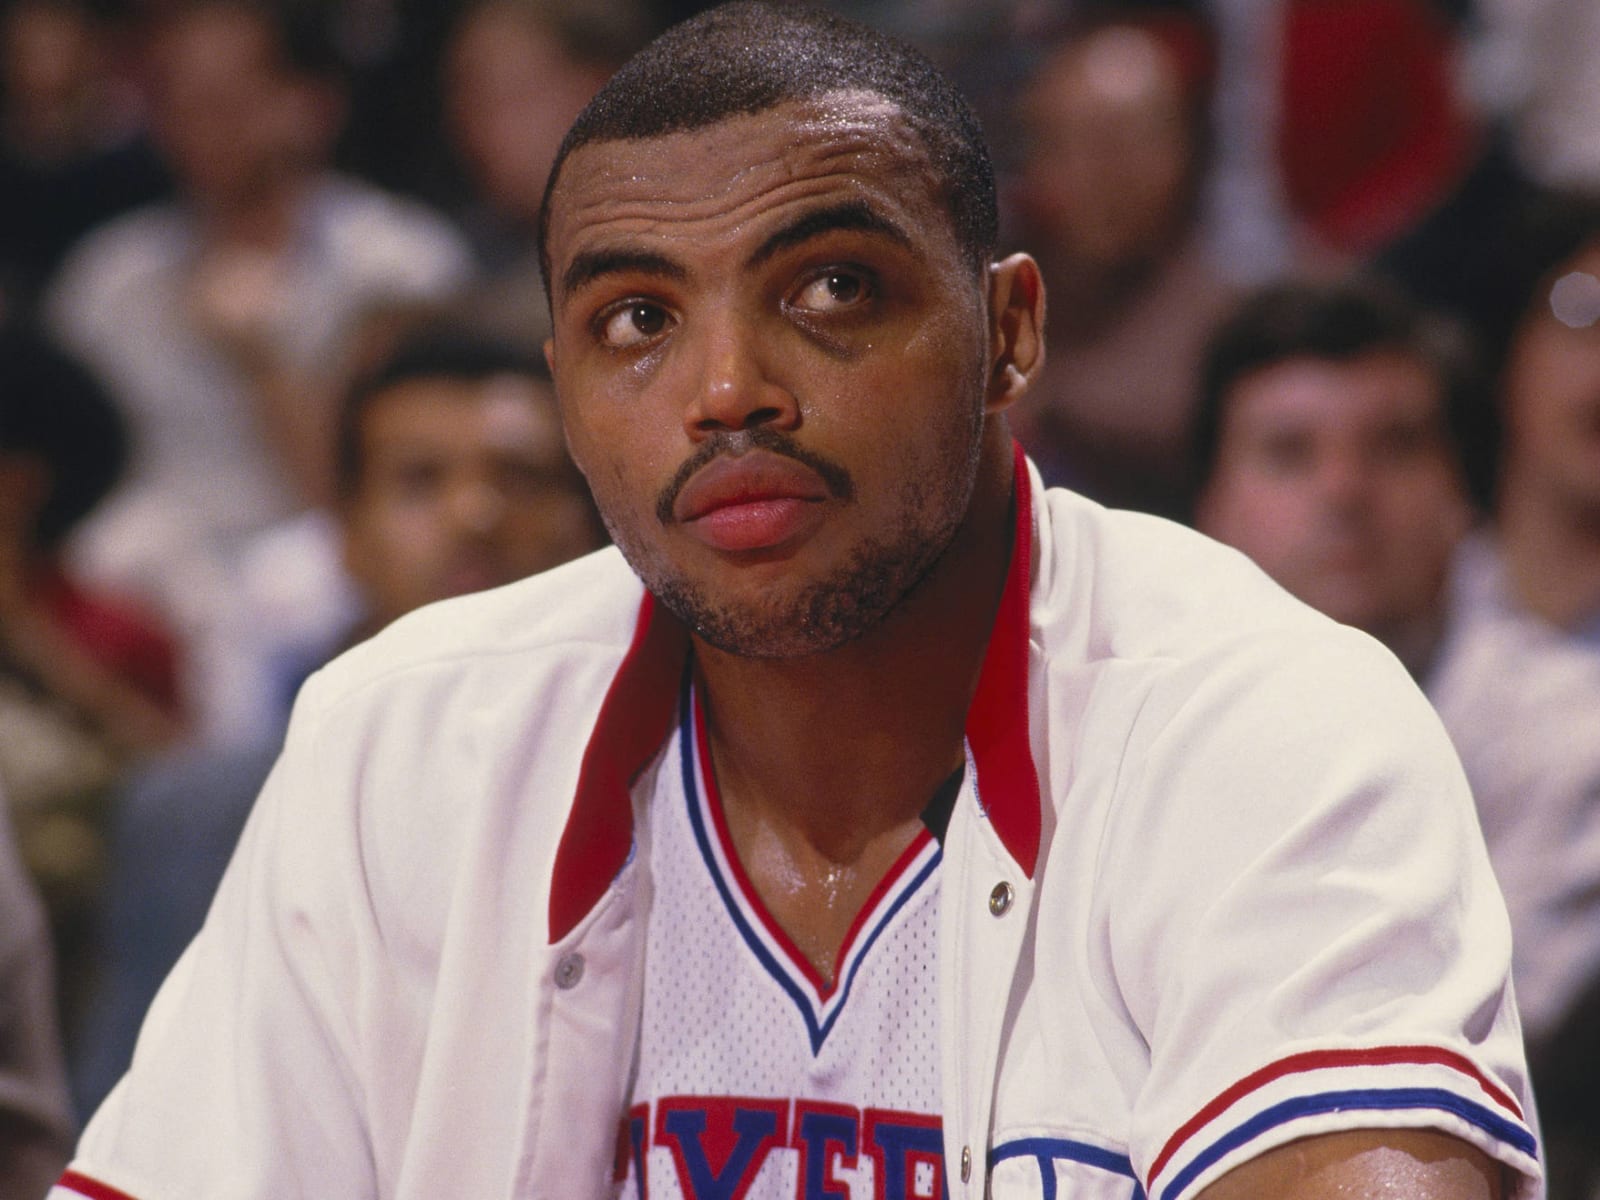 Charles Barkley finally told the story of how he got the nickname